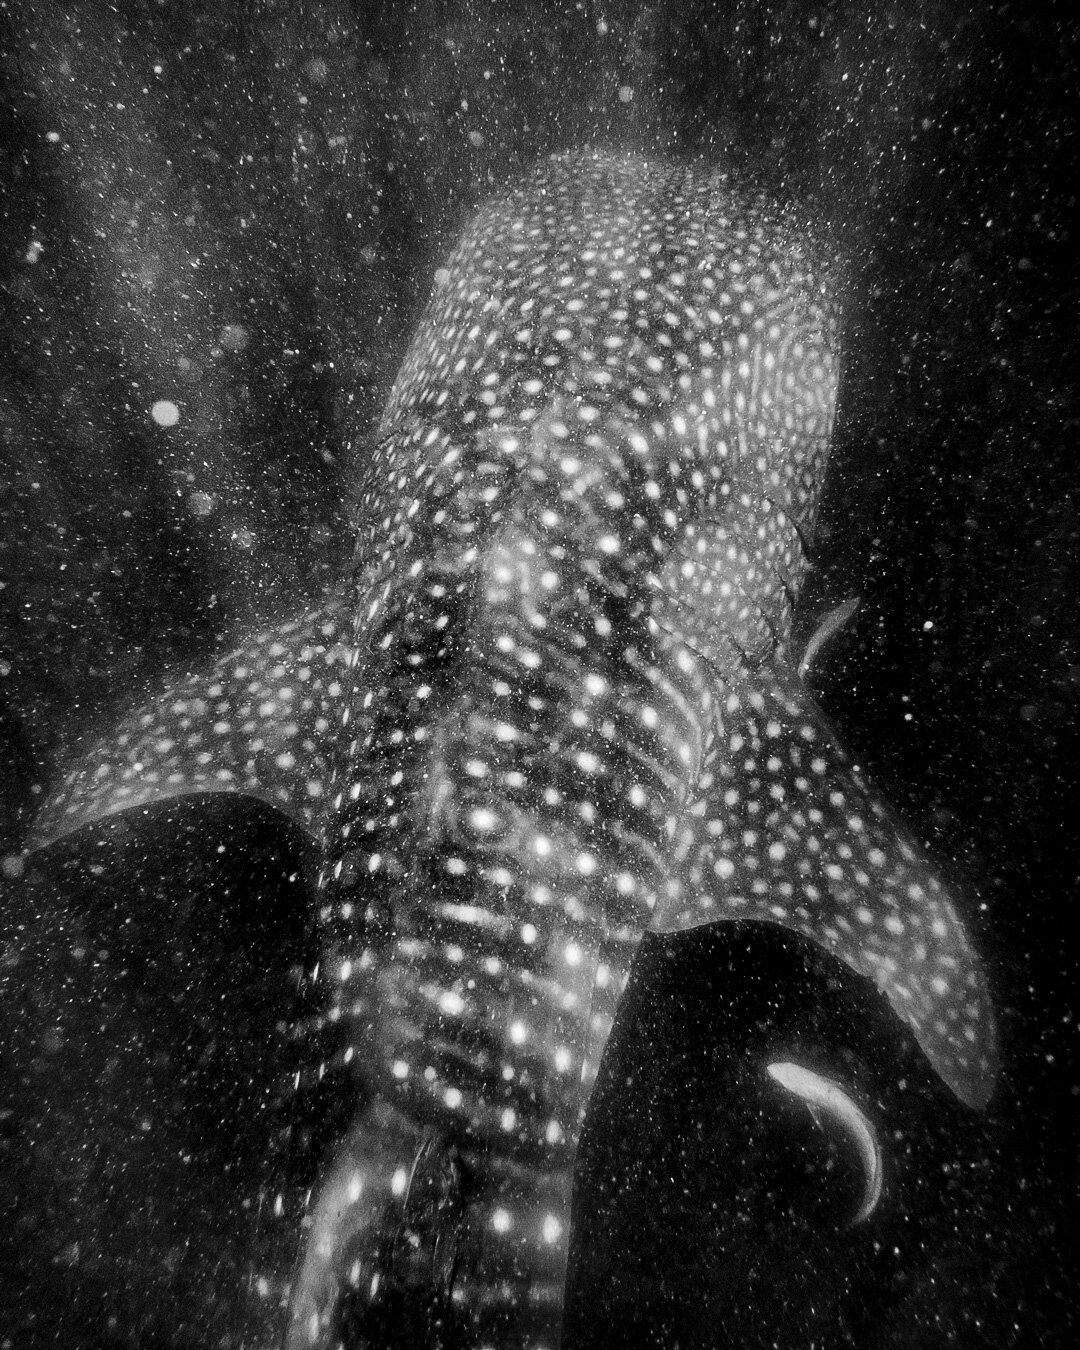 Young Whale Shark 🐋🦈
Although not of the highest quality, this picture holds great significance for me.
It was one of those moments where my passion for nature photography truly ignited🤩
Taken back in 2015 near Koh Tao, Thailand, the encounter wit